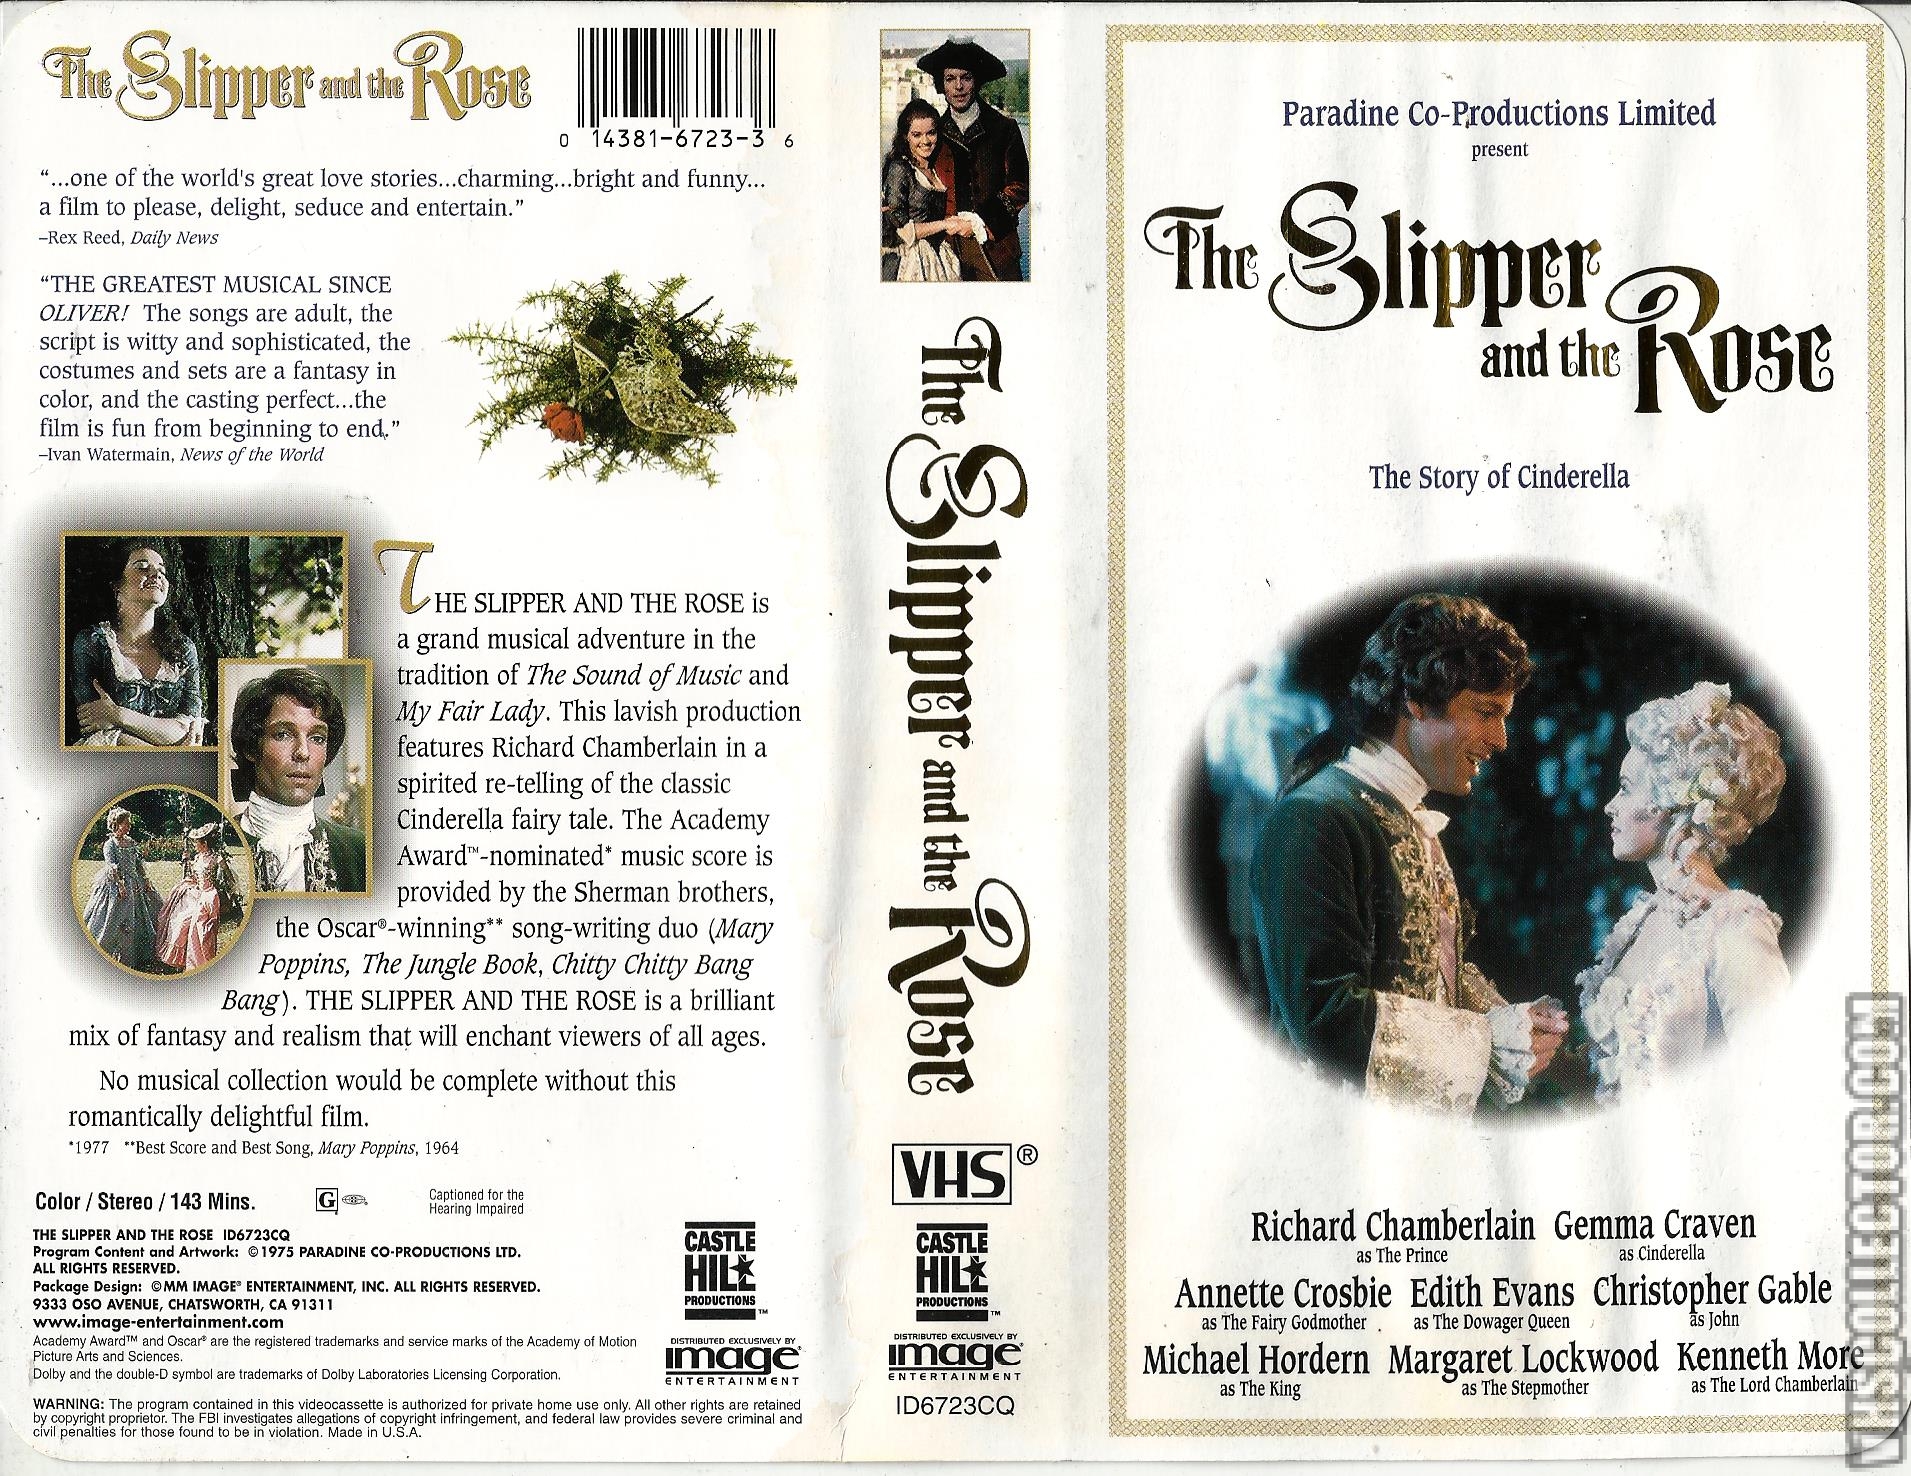 The Slipper and the Rose | VHSCollector.com